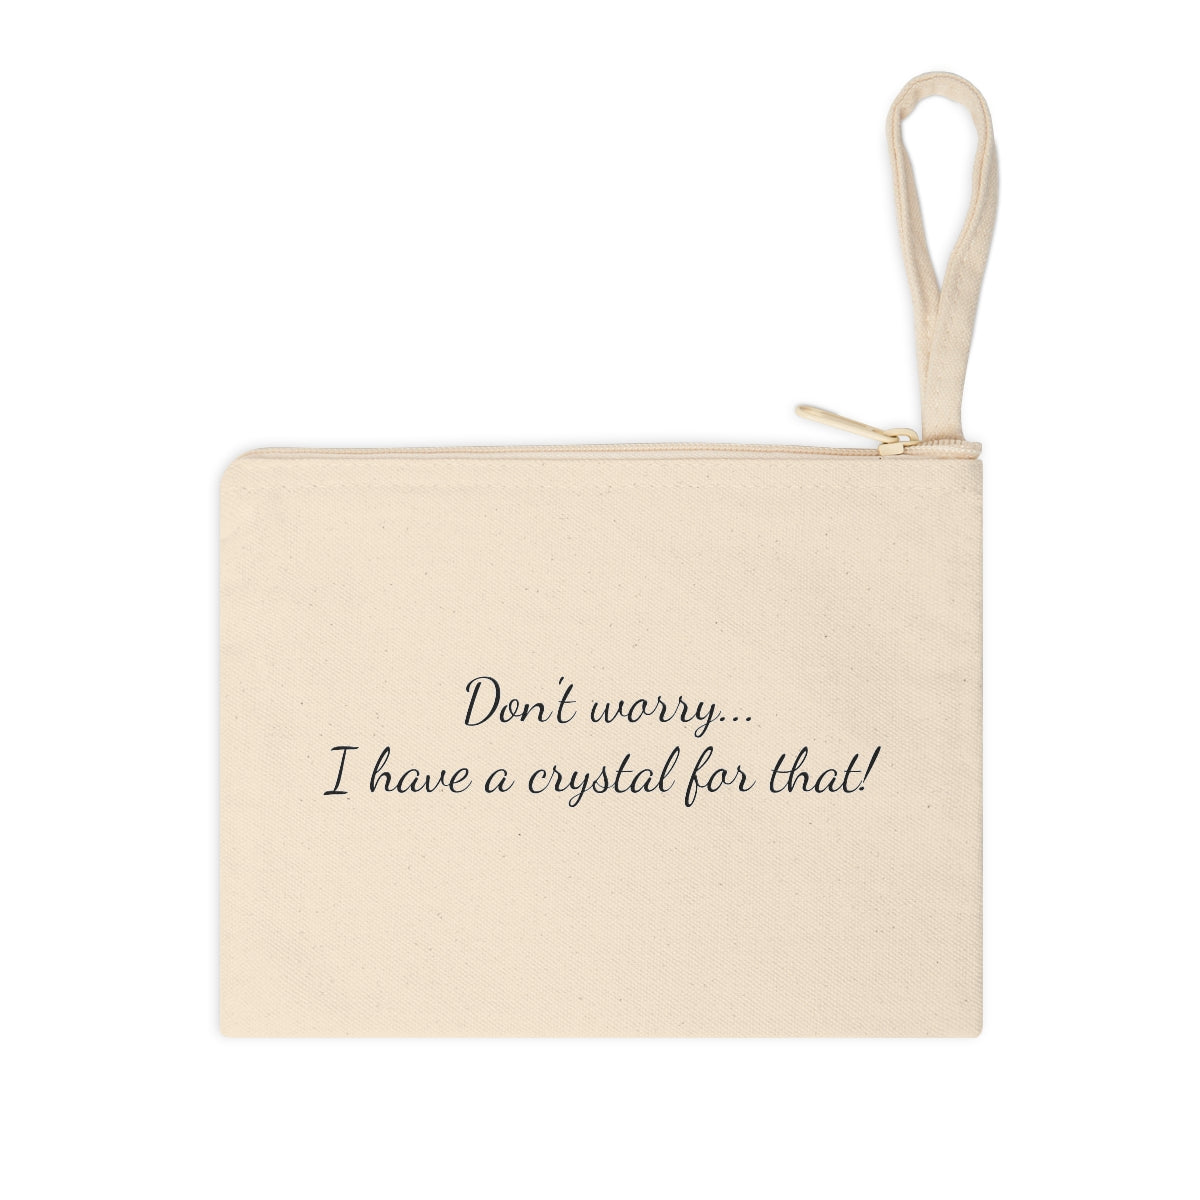 I have a crystal for that (Zipper Pouch)